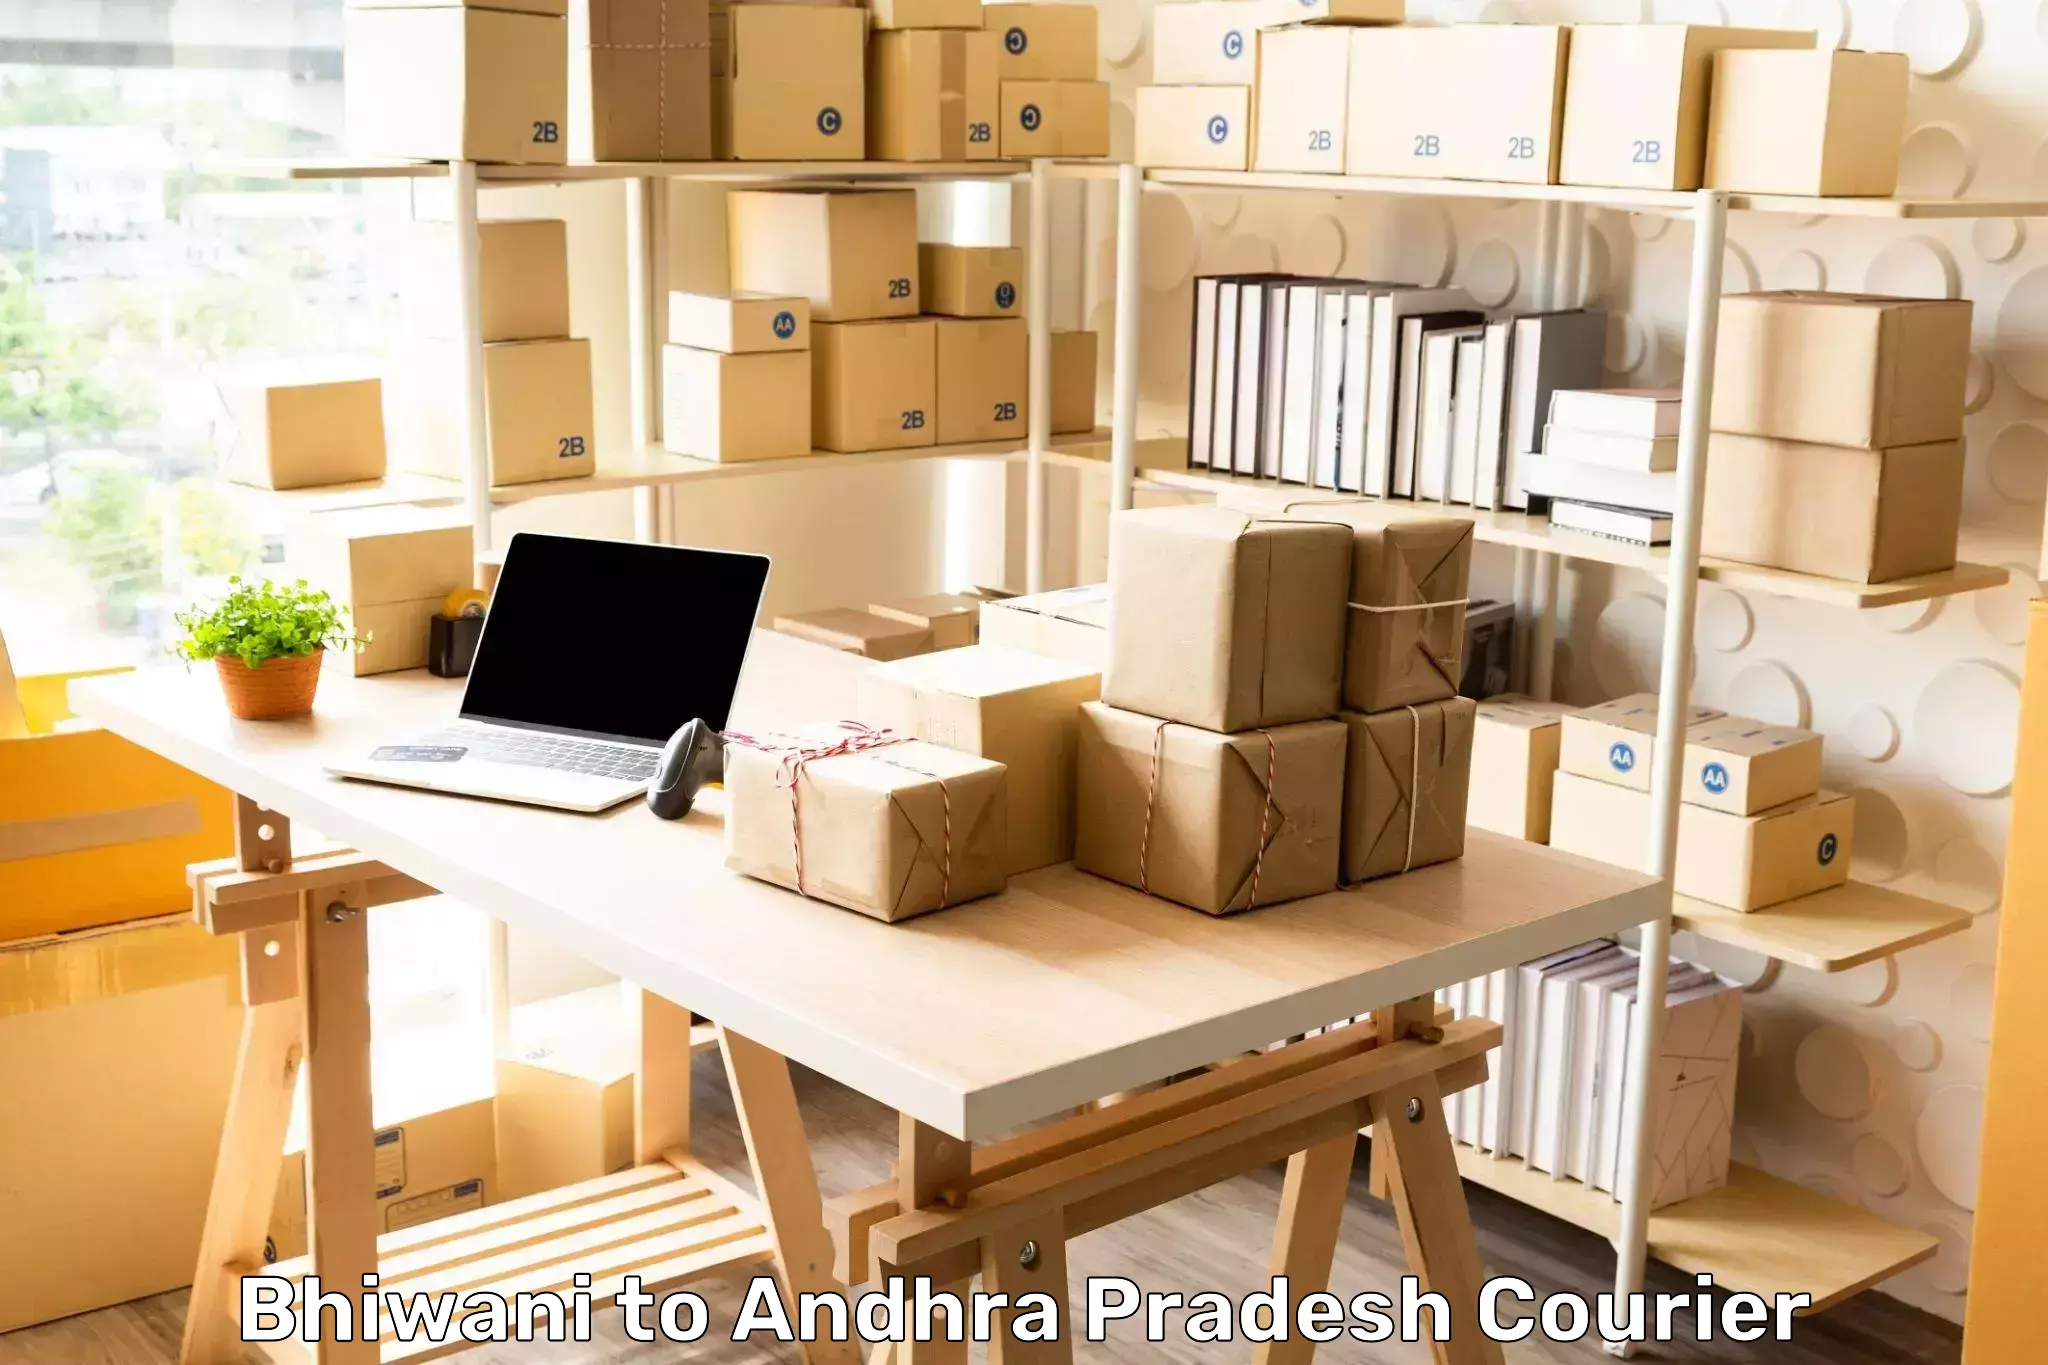 Cash on delivery service Bhiwani to Andhra Pradesh